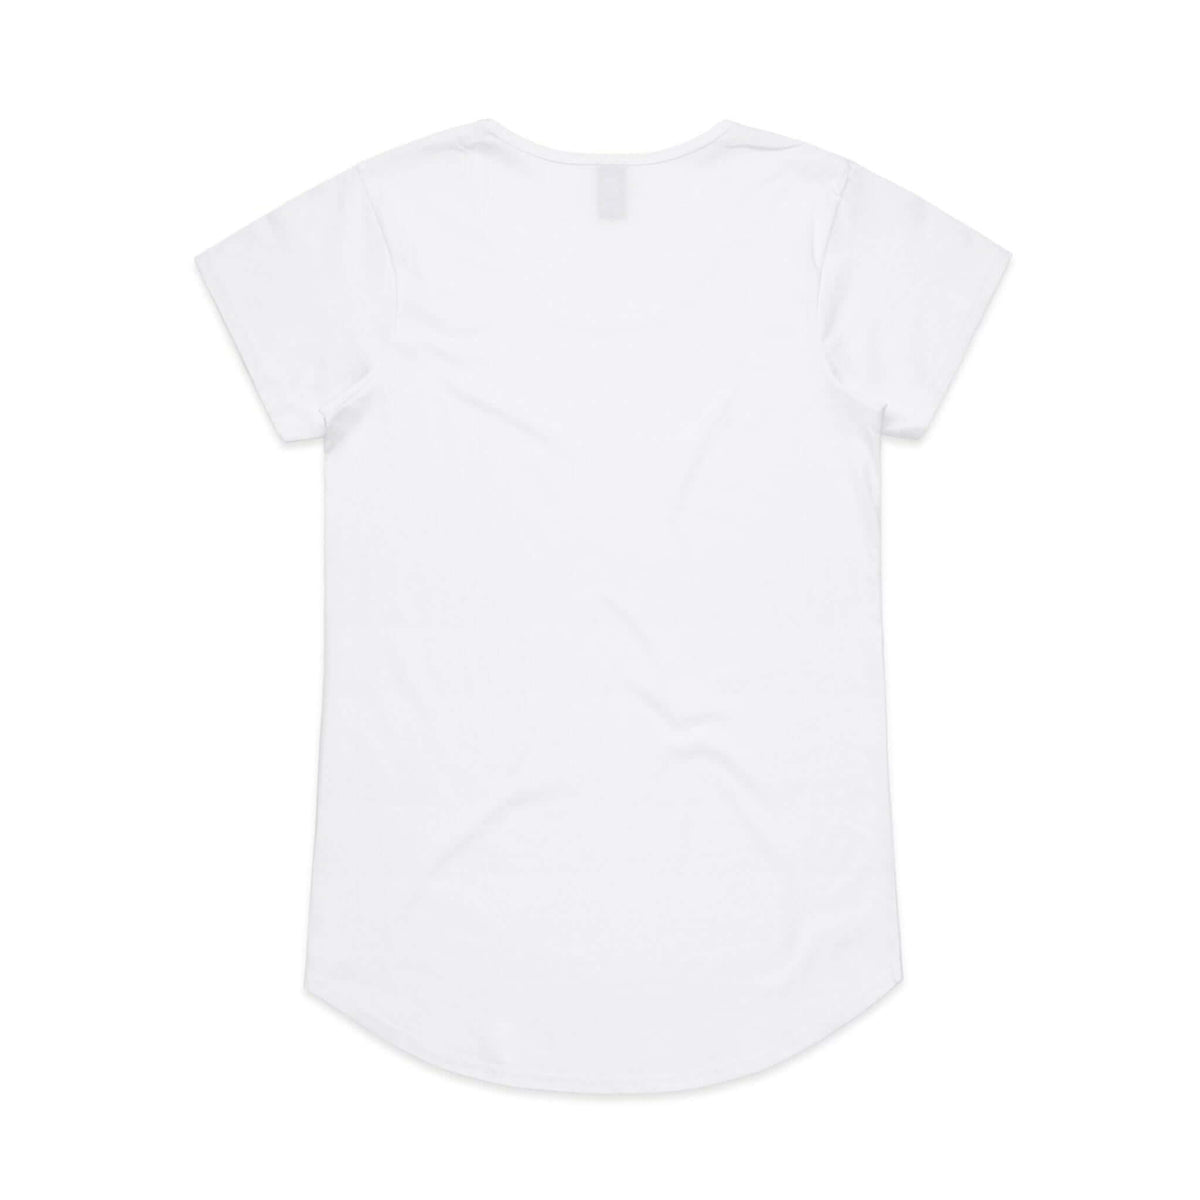 Back view of womens white t shirt 